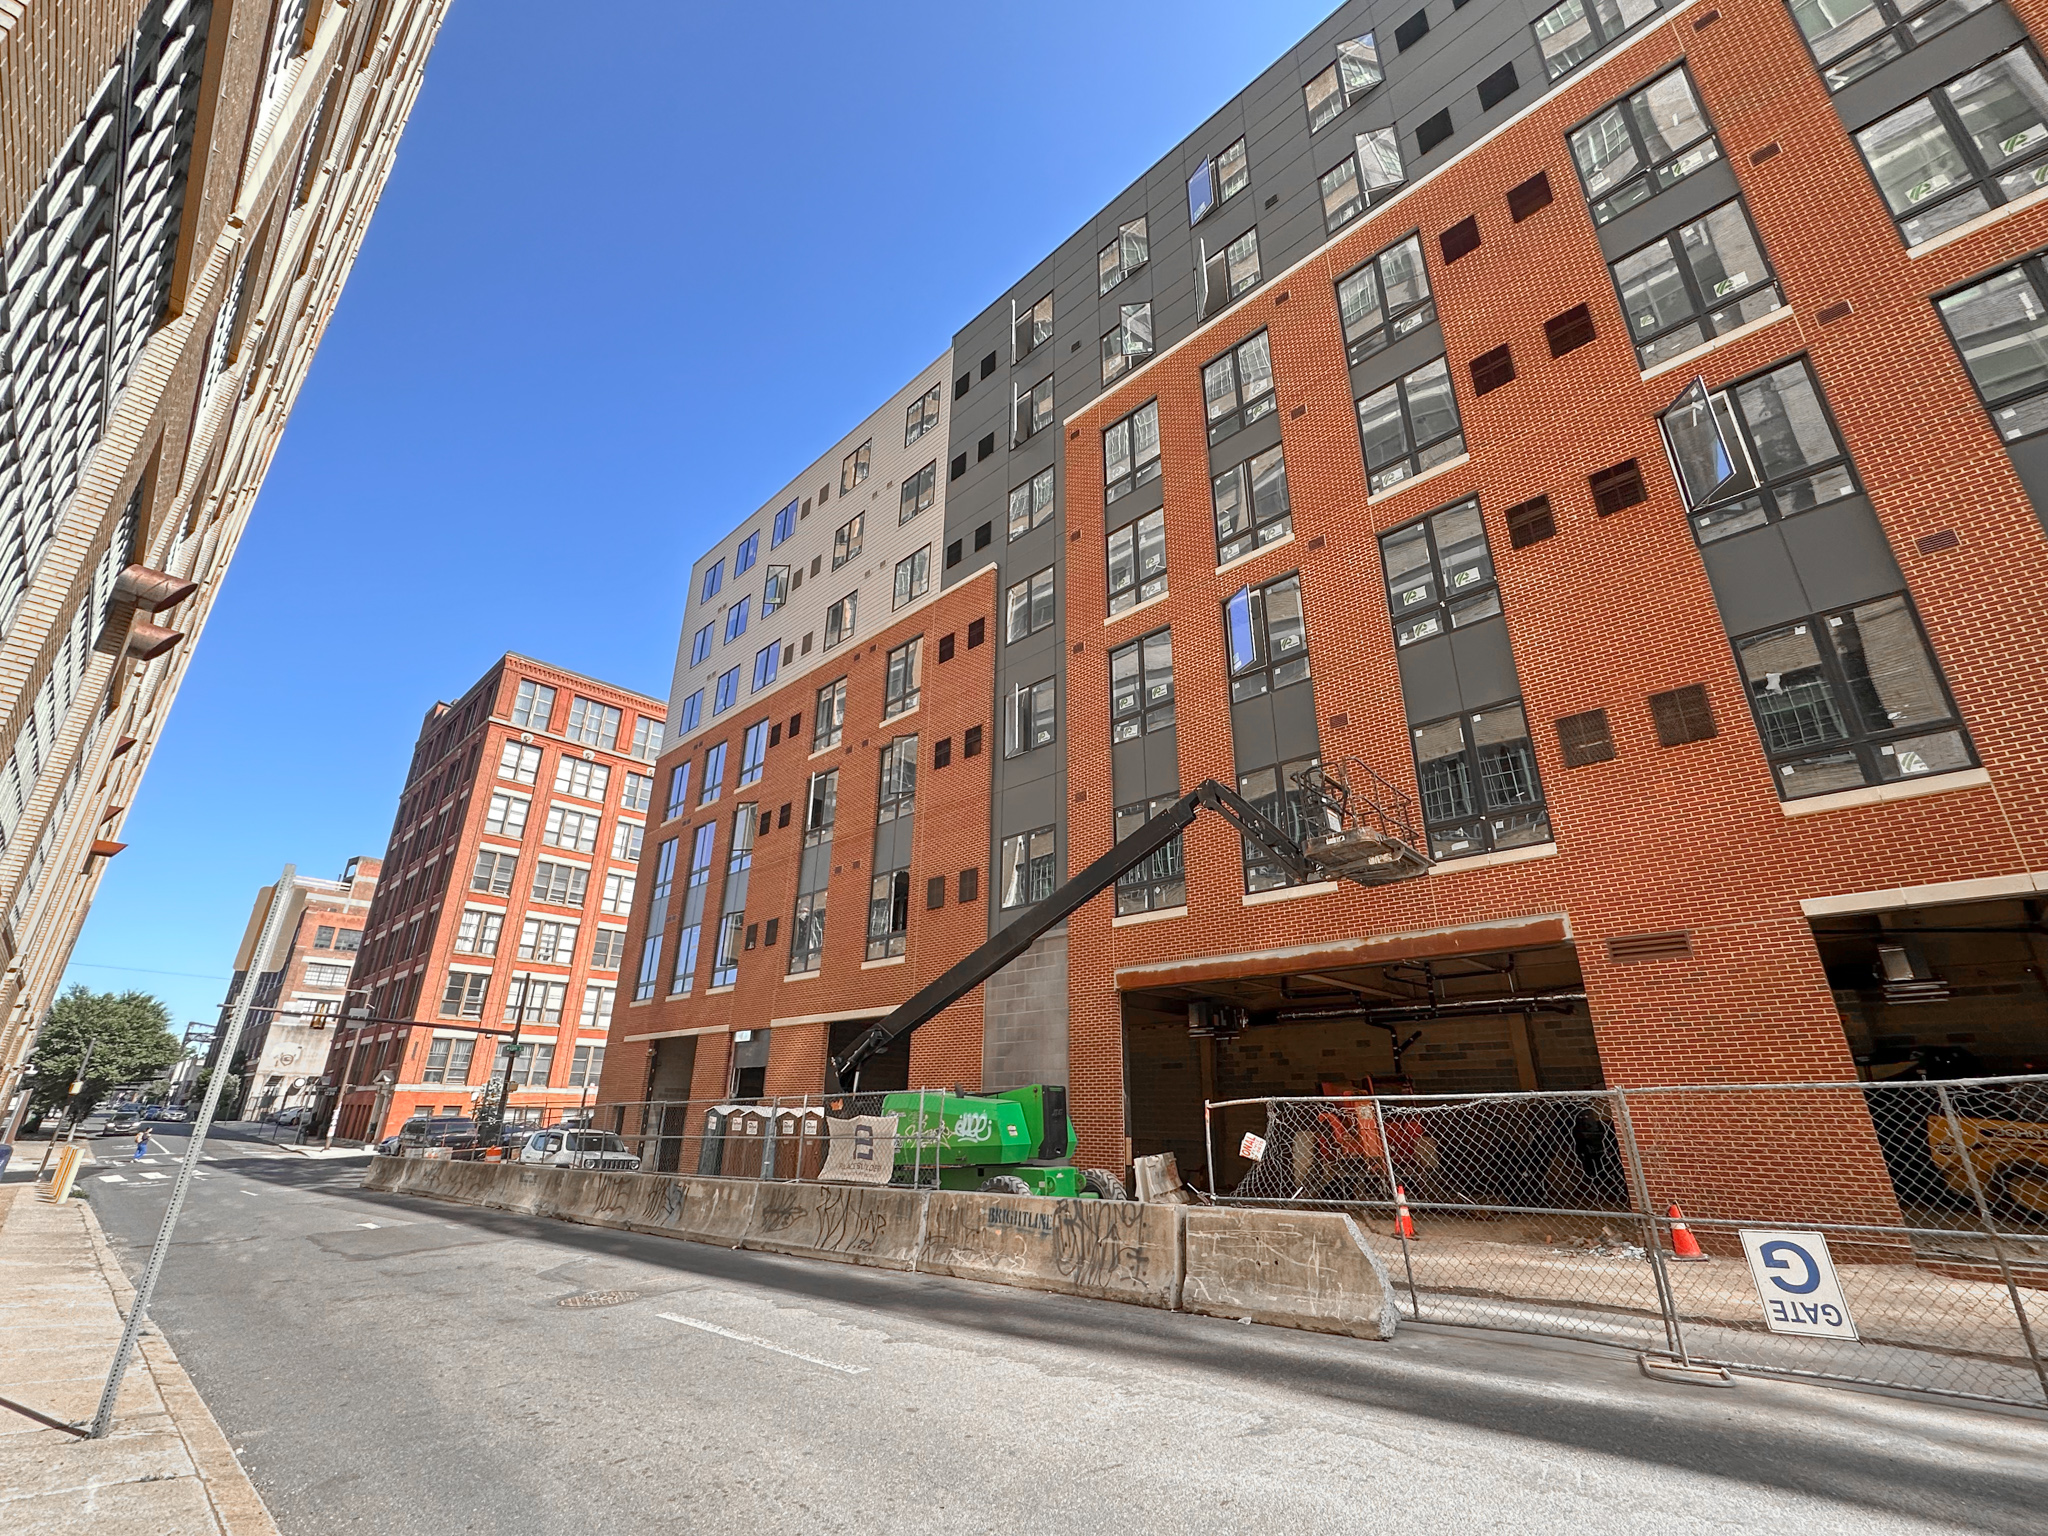 1306-14 Callowhill Street. Photo by Jamie Meller. May 2023